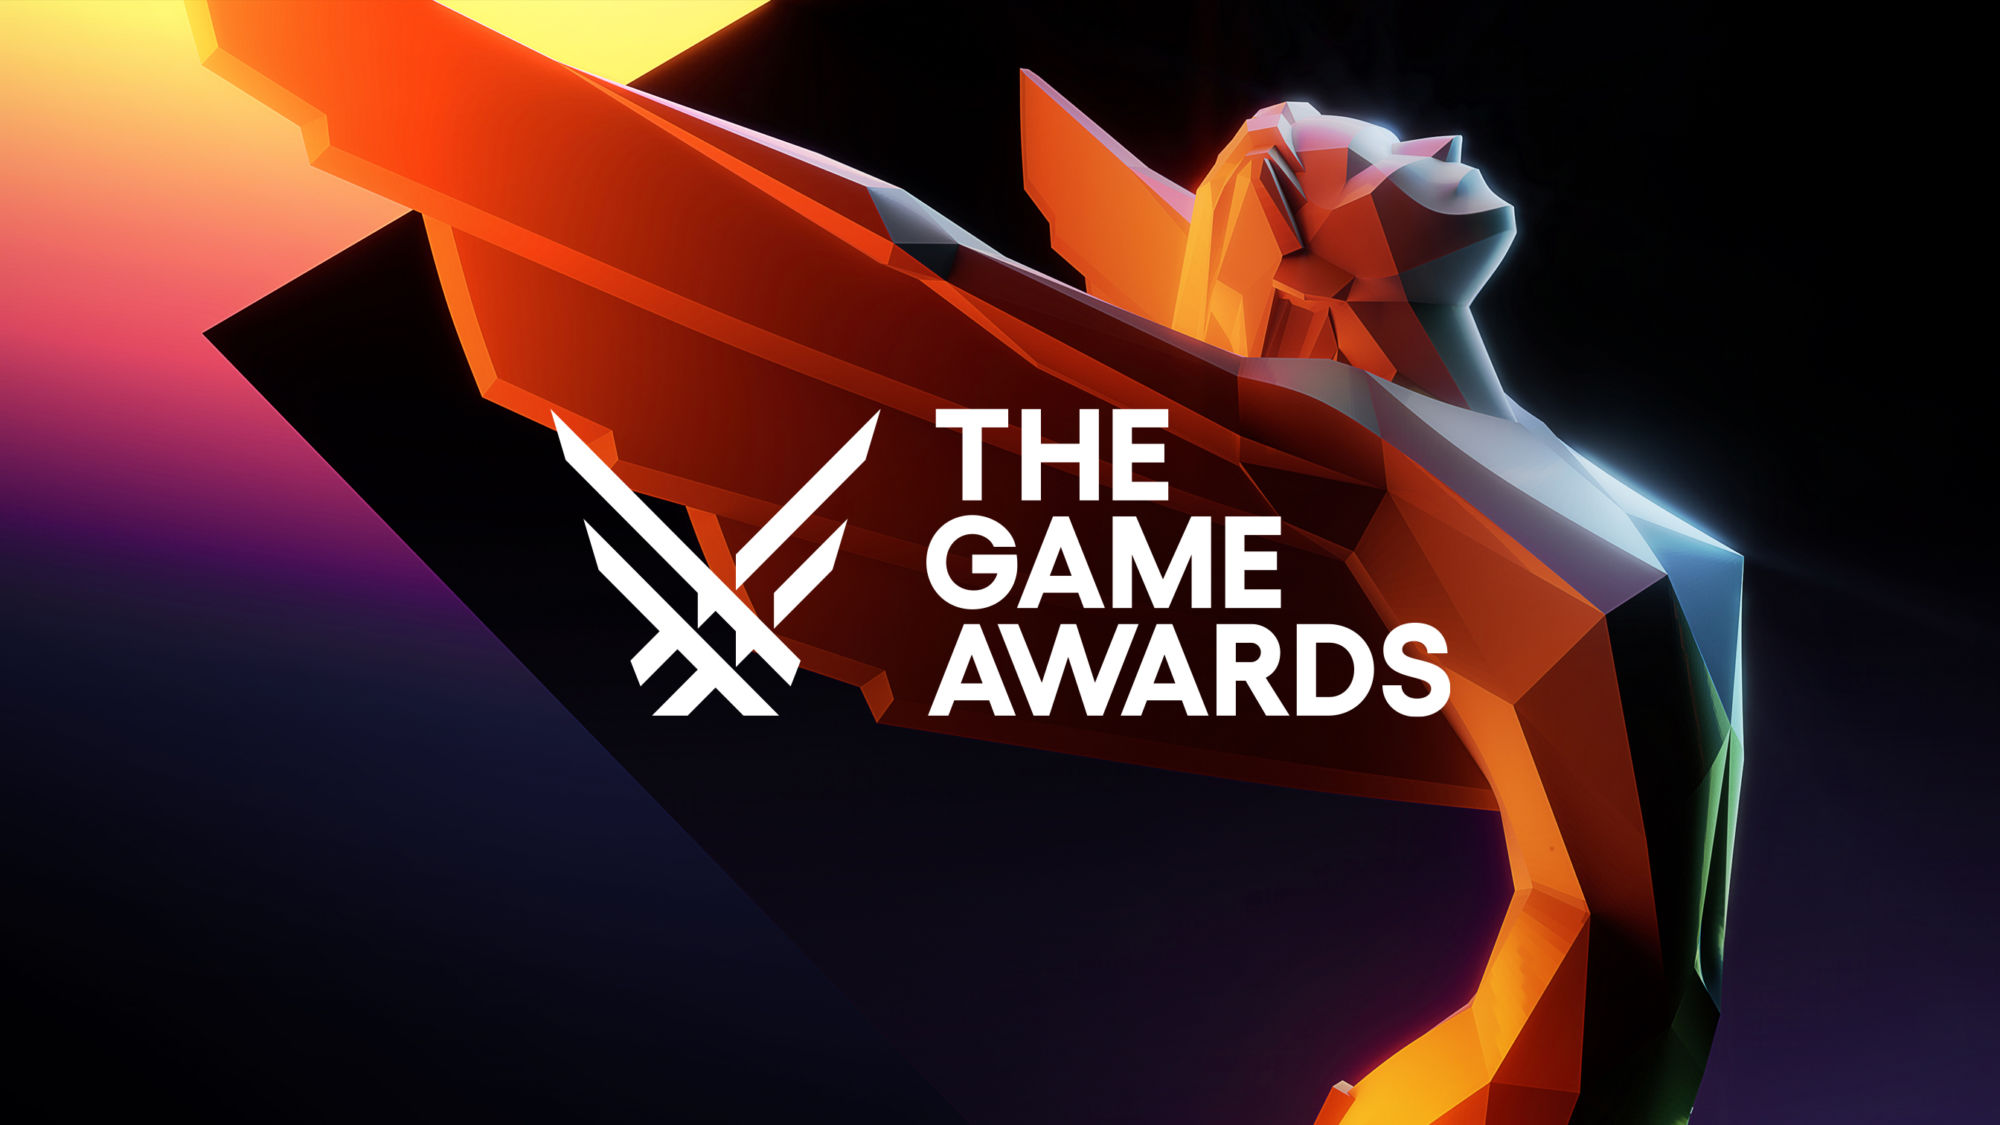 The Game Awards Teams Up with the Los Angeles Philharmonic Association for the  Game Awards 10-Year Celebration at the Hollywood Bowl Sunday, June 25, 2023